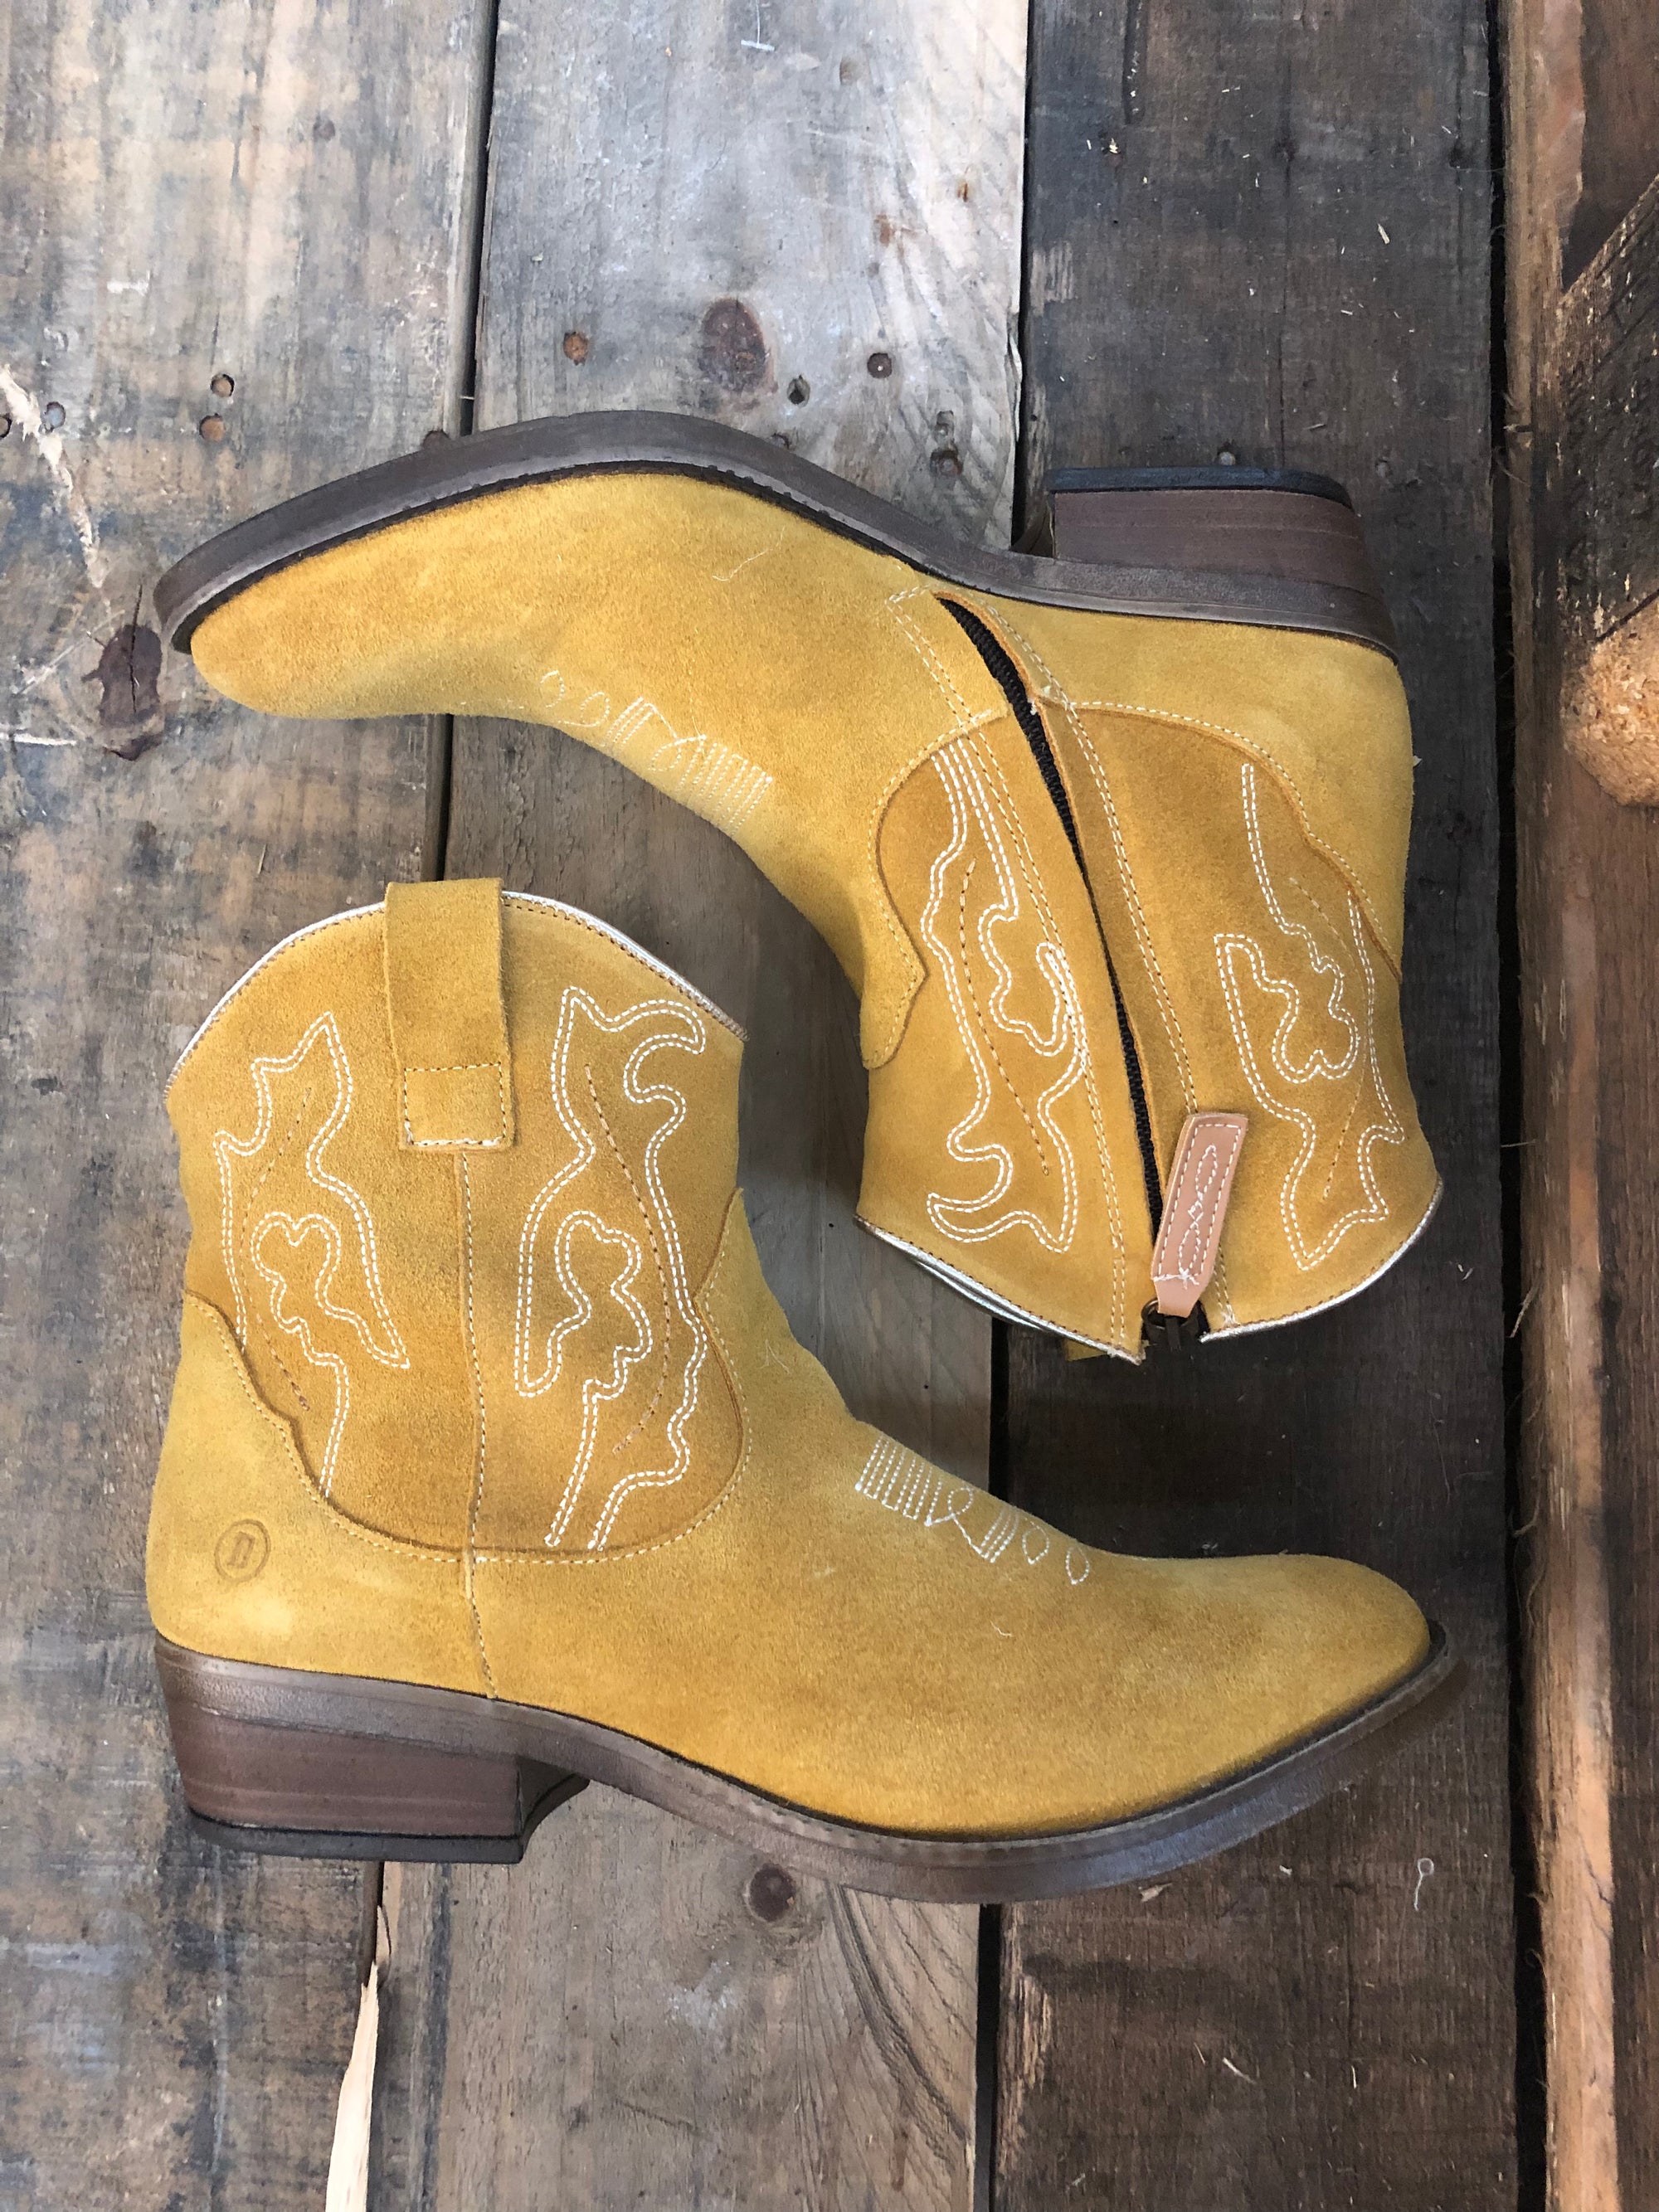 Daisy Mae Mustard Suede Leather Booties w/ Stitching ~ Size 10 ~ SAMPLE SALE